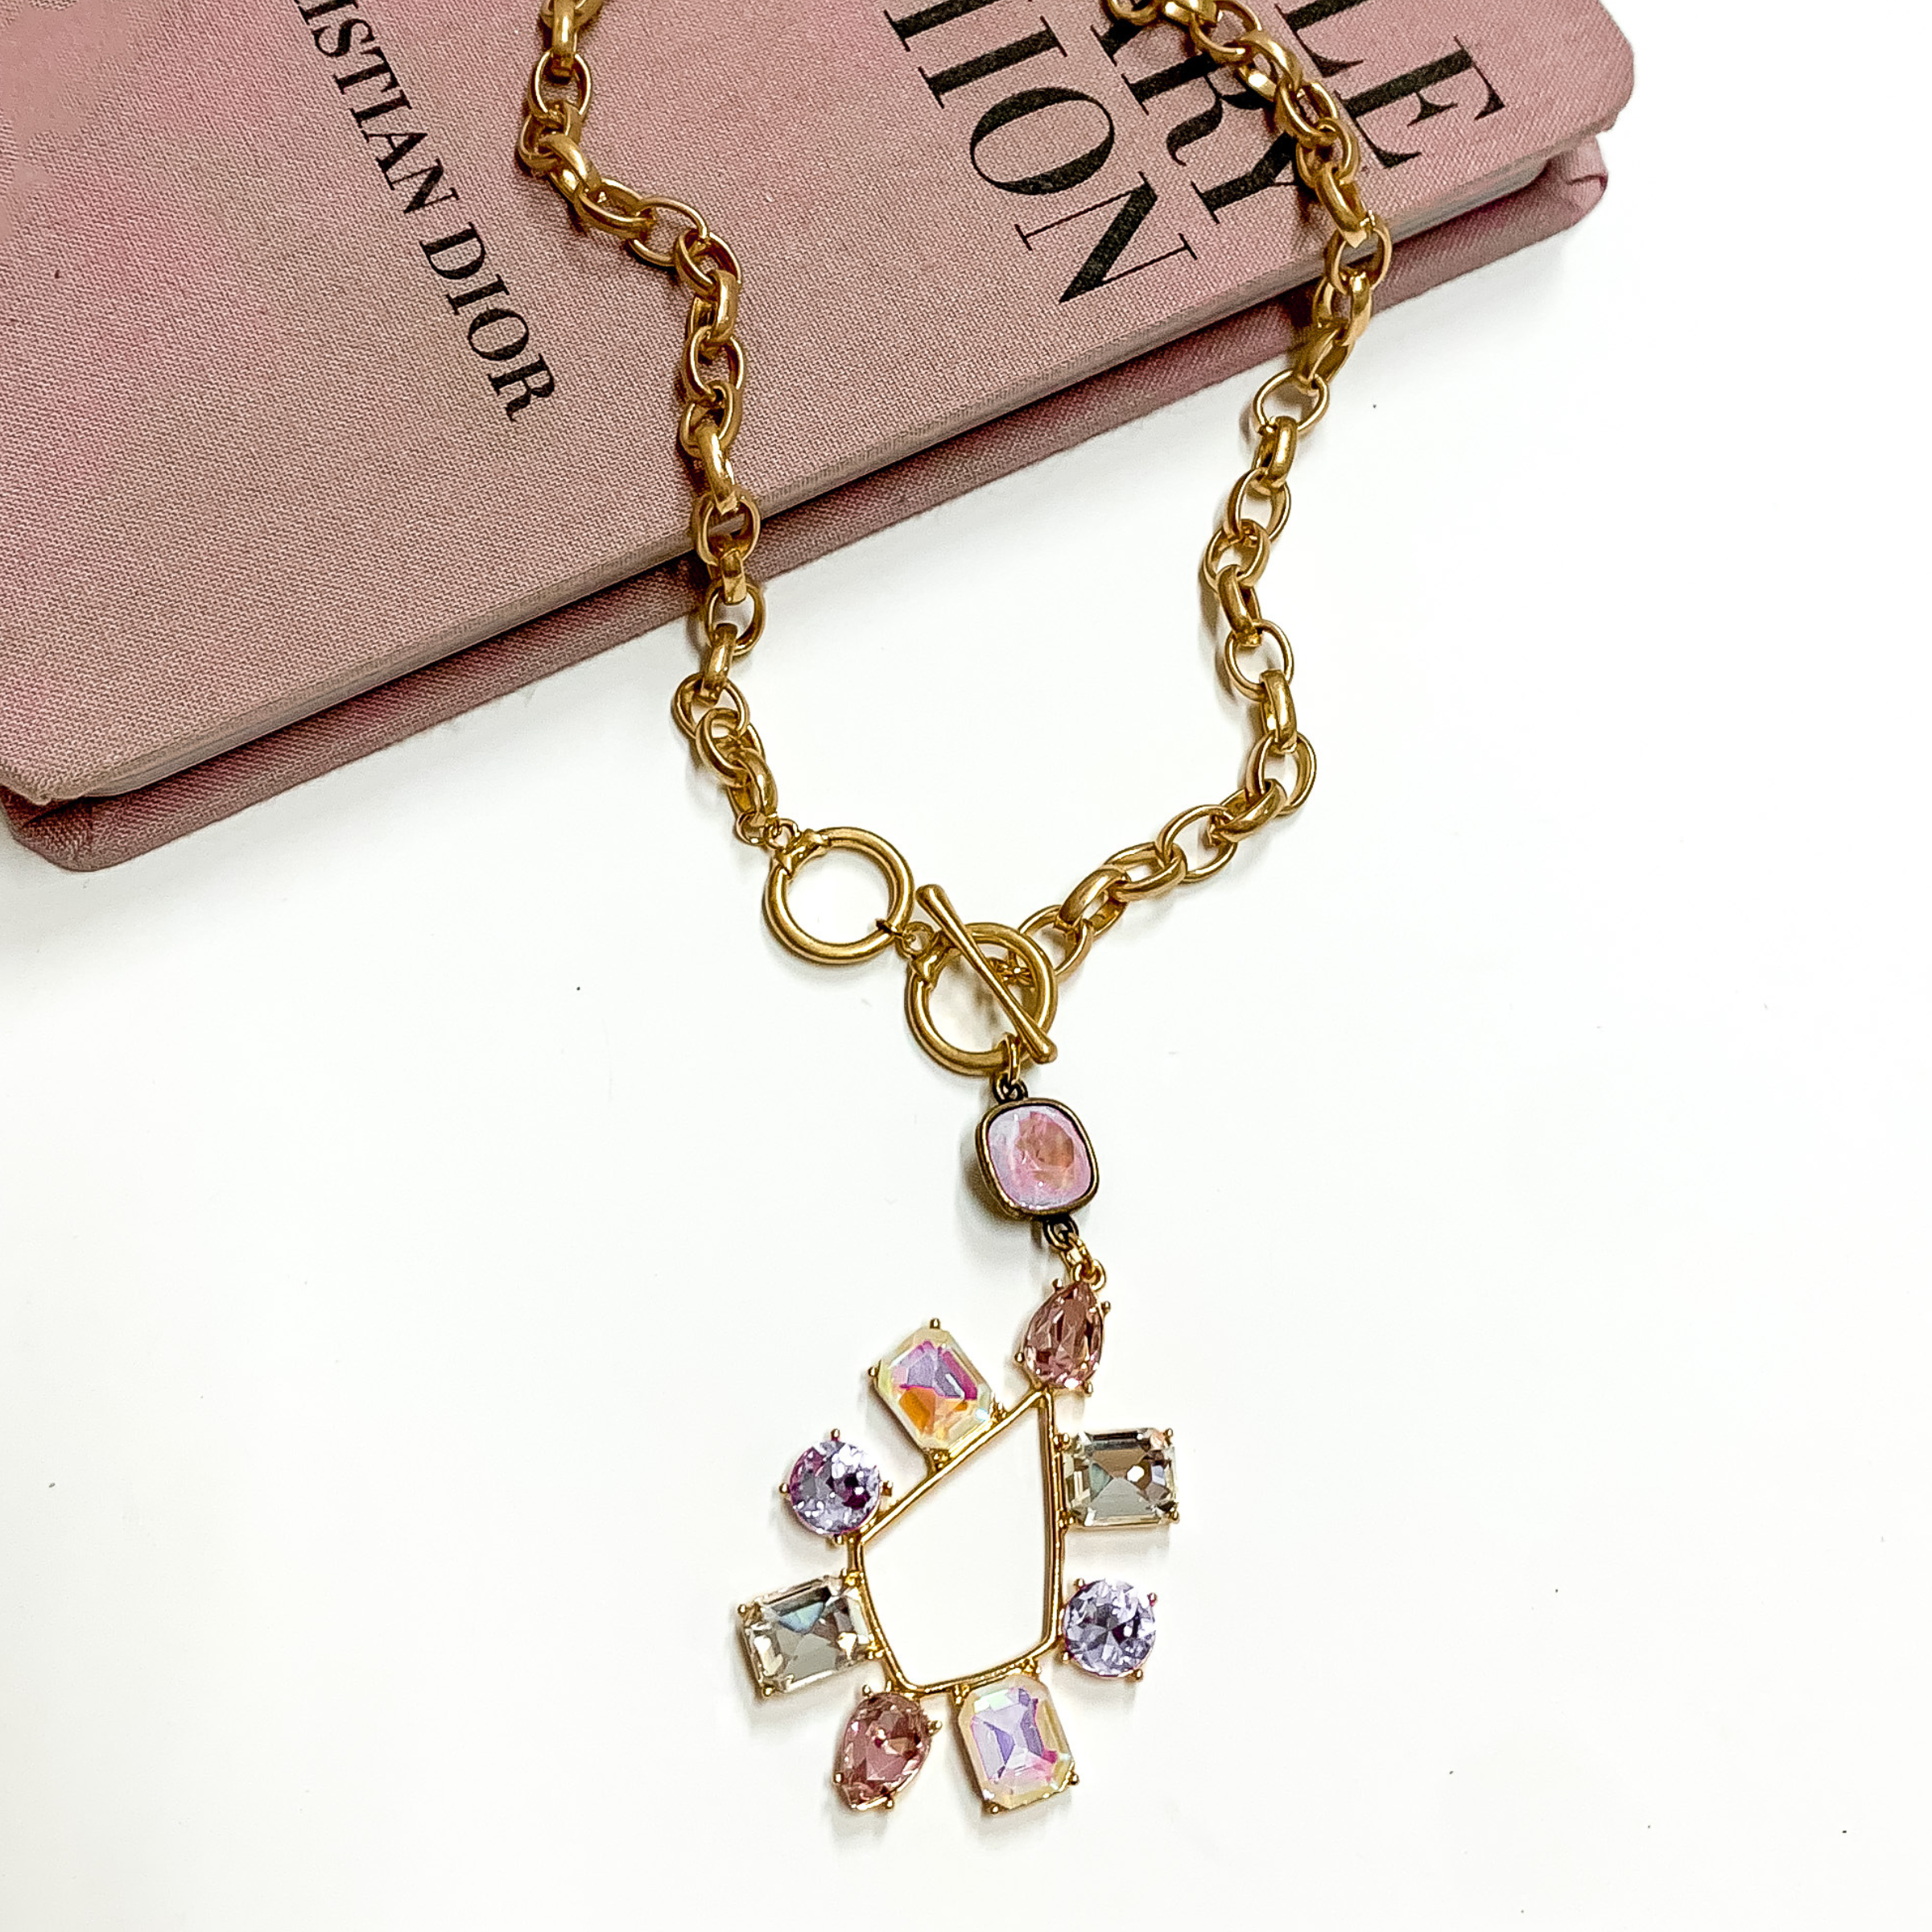 Gold chain necklace with toggle, front clasp with a lavender cushion cut crystal drop and a multi color crystal teardrop. This necklace is pictured laying partially on a mauve colored book on a white background. 